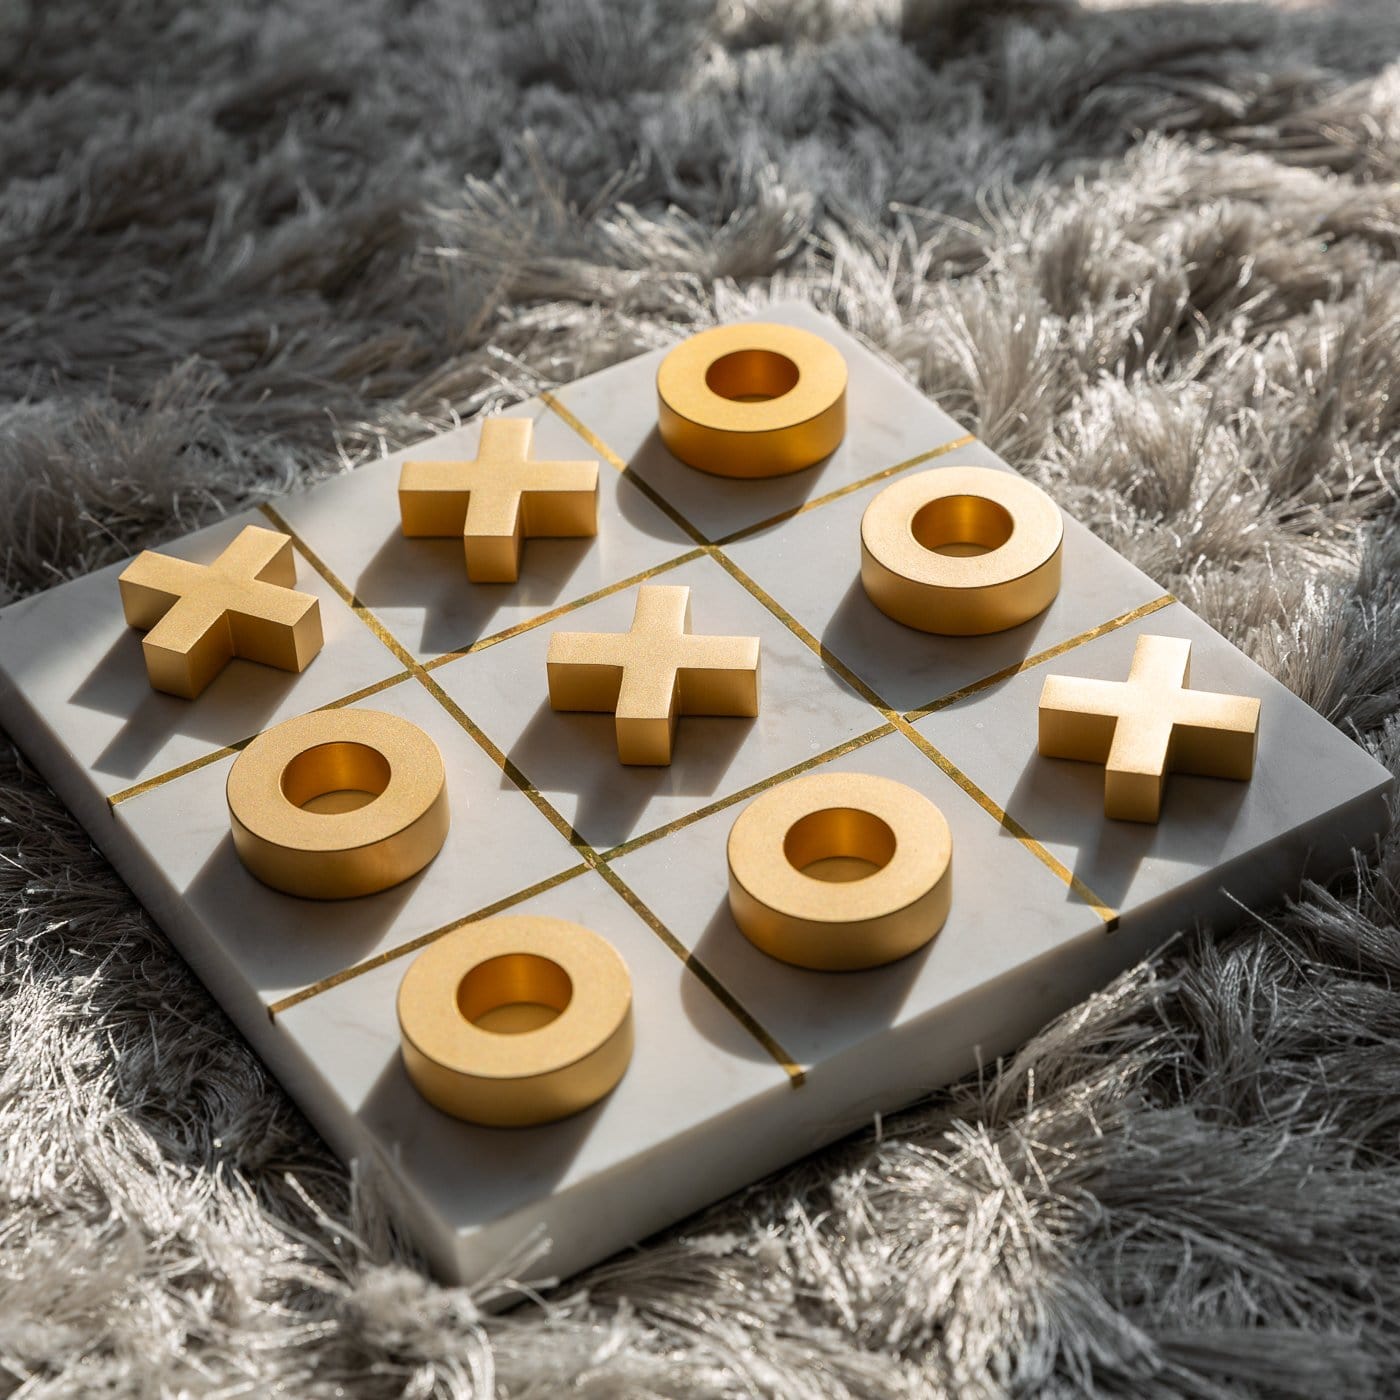 Marble Tic-Tac-Toe Game – Articture